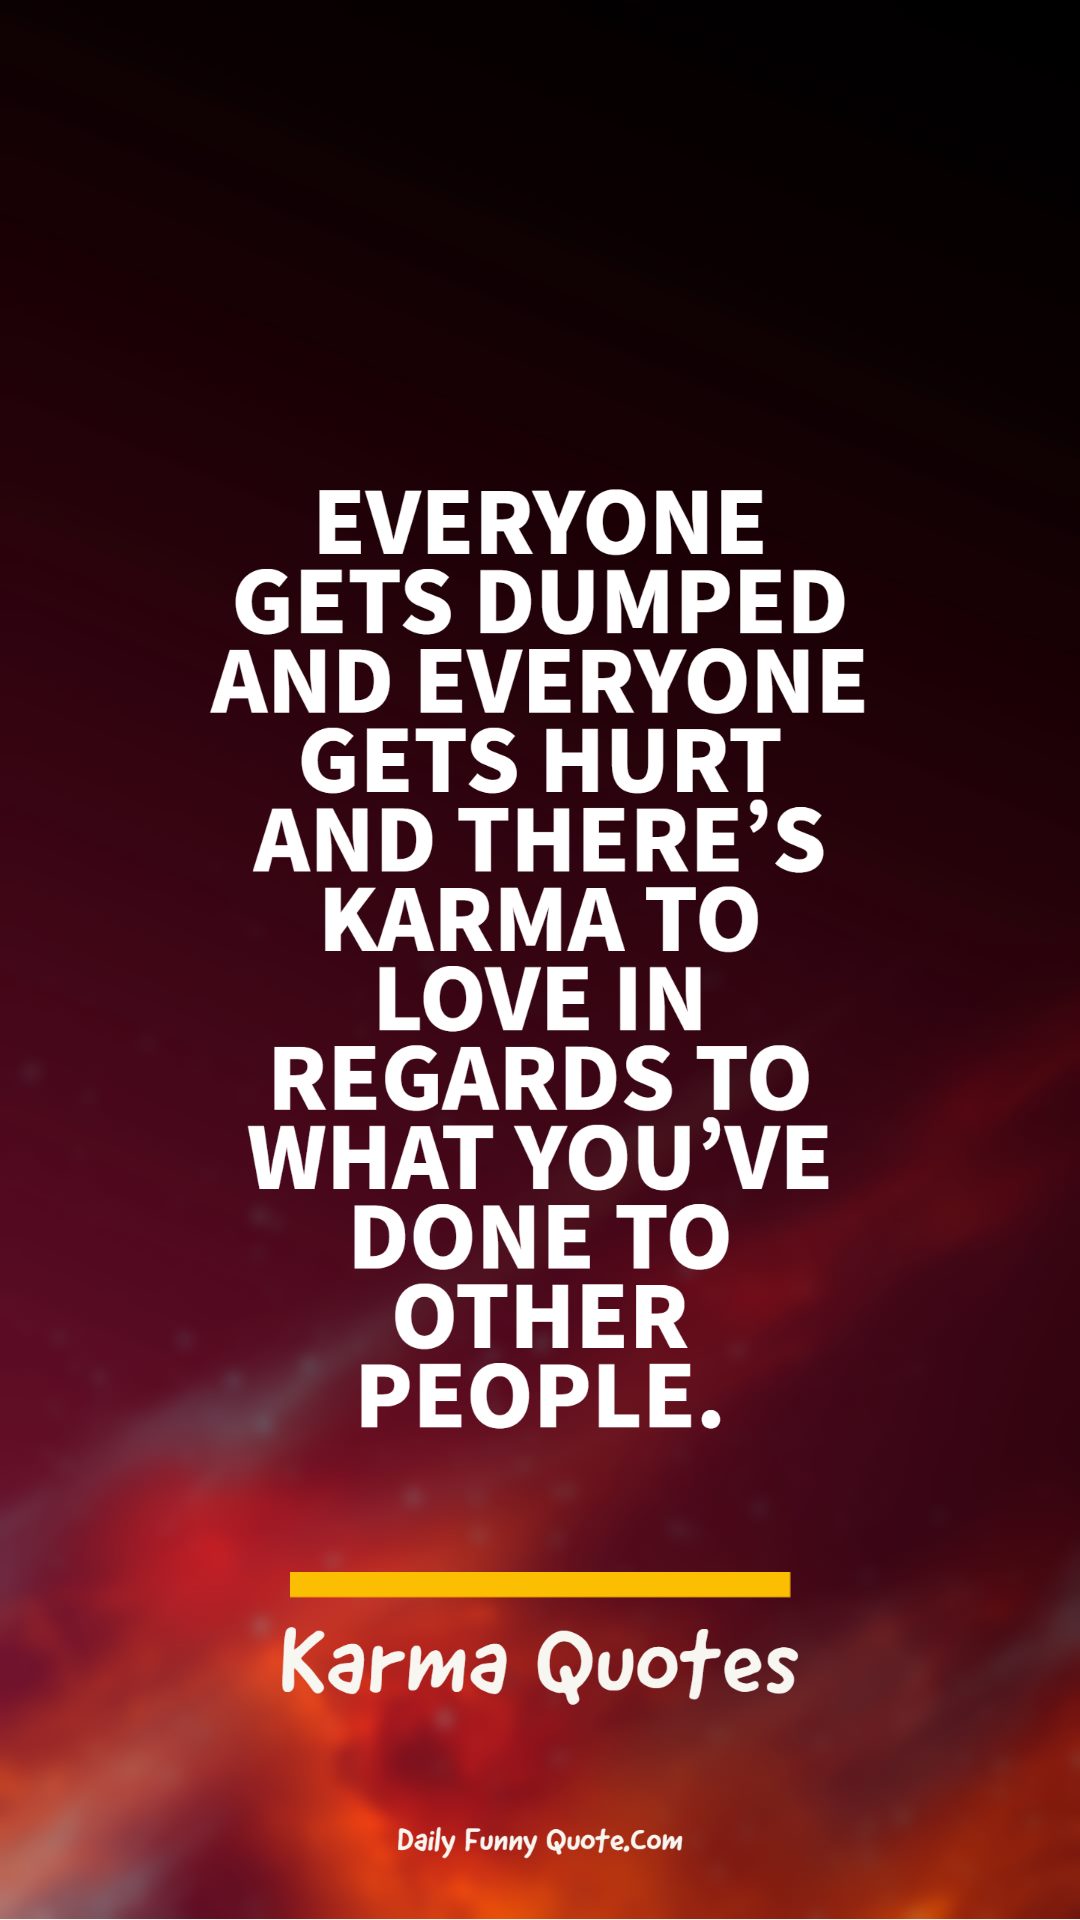 do believe in karma quotes about karma in relationship and love